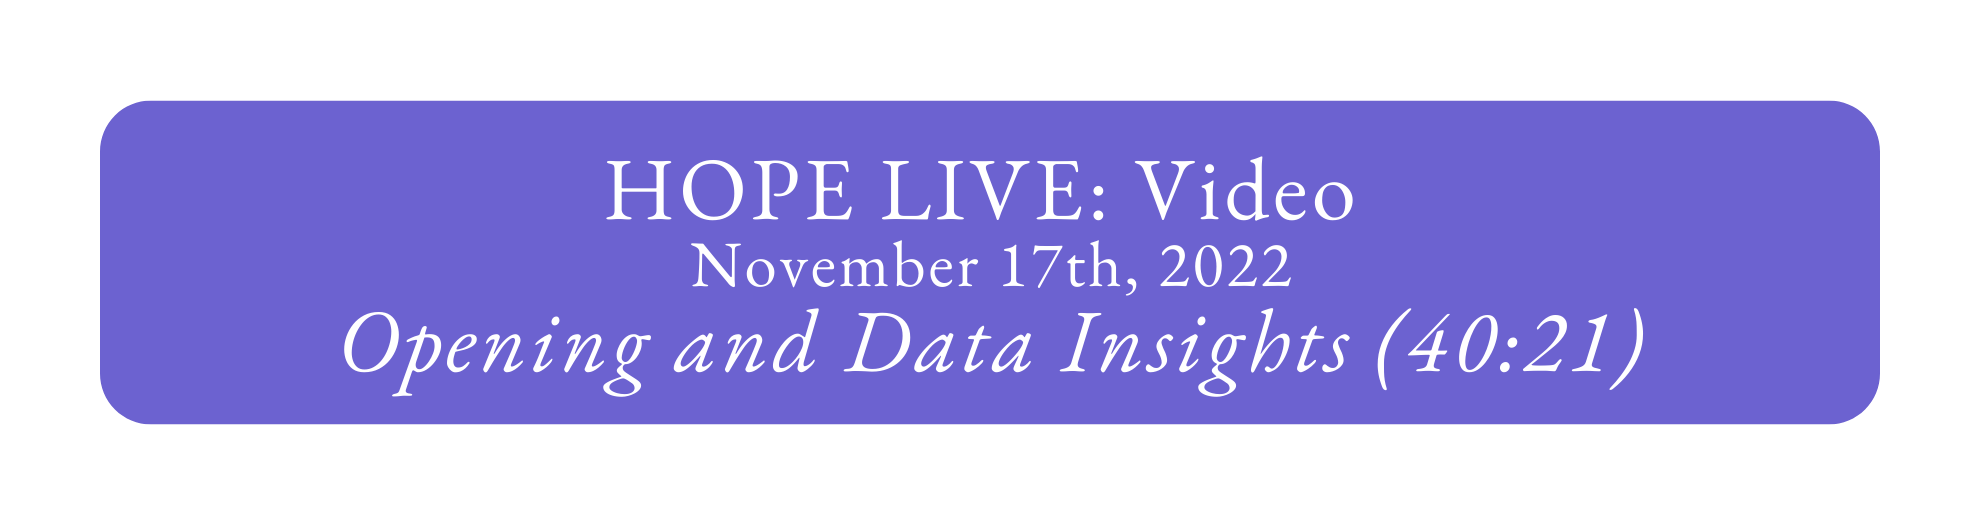 HOPE Live Opening and Data Insights